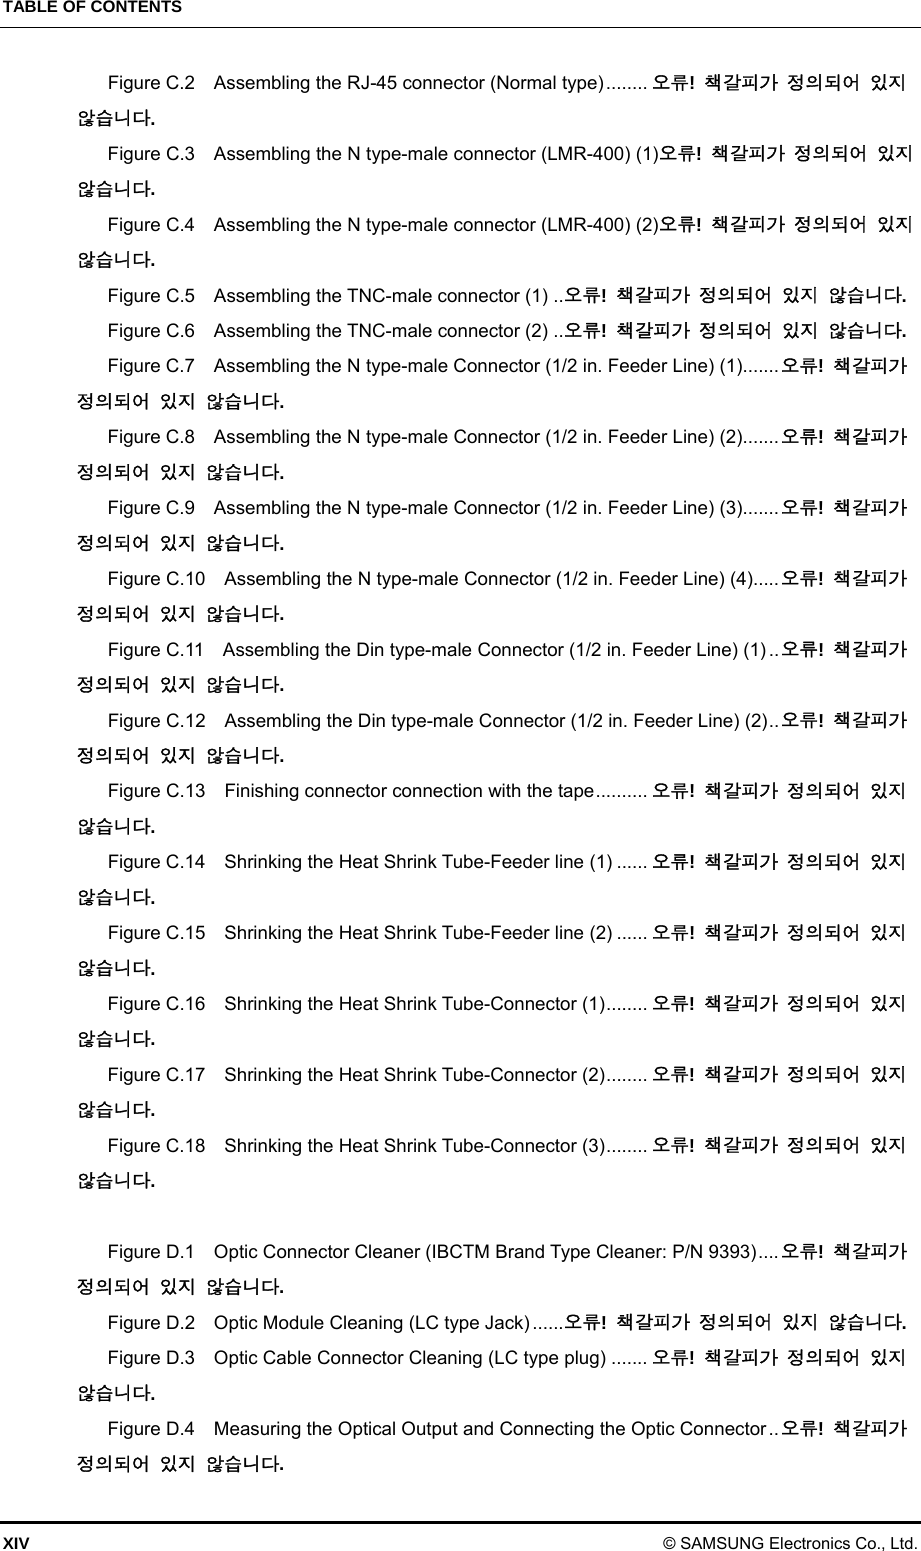 TABLE OF CONTENTS XIV © SAMSUNG Electronics Co., Ltd. Figure C.2  Assembling the RJ-45 connector (Normal type) ........ 오류!  책갈피가 정의되어 있지 않습니다. Figure C.3    Assembling the N type-male connector (LMR-400) (1)오류!  책갈피가 정의되어 있지 않습니다. Figure C.4    Assembling the N type-male connector (LMR-400) (2)오류!  책갈피가 정의되어 있지 않습니다. Figure C.5    Assembling the TNC-male connector (1) .. 오류!  책갈피가 정의되어 있지 않습니다. Figure C.6    Assembling the TNC-male connector (2) .. 오류!  책갈피가 정의되어 있지 않습니다. Figure C.7    Assembling the N type-male Connector (1/2 in. Feeder Line) (1)....... 오류!  책갈피가 정의되어 있지 않습니다. Figure C.8    Assembling the N type-male Connector (1/2 in. Feeder Line) (2)....... 오류!  책갈피가 정의되어 있지 않습니다. Figure C.9    Assembling the N type-male Connector (1/2 in. Feeder Line) (3)....... 오류!  책갈피가 정의되어 있지 않습니다. Figure C.10    Assembling the N type-male Connector (1/2 in. Feeder Line) (4)..... 오류!  책갈피가 정의되어 있지 않습니다. Figure C.11    Assembling the Din type-male Connector (1/2 in. Feeder Line) (1) .. 오류!  책갈피가 정의되어 있지 않습니다. Figure C.12    Assembling the Din type-male Connector (1/2 in. Feeder Line) (2) .. 오류!  책갈피가 정의되어 있지 않습니다. Figure C.13    Finishing connector connection with the tape .......... 오류!  책갈피가 정의되어 있지 않습니다. Figure C.14    Shrinking the Heat Shrink Tube-Feeder line (1) ...... 오류!  책갈피가 정의되어 있지 않습니다. Figure C.15    Shrinking the Heat Shrink Tube-Feeder line (2) ...... 오류!  책갈피가 정의되어 있지 않습니다. Figure C.16    Shrinking the Heat Shrink Tube-Connector (1) ........ 오류!  책갈피가 정의되어 있지 않습니다. Figure C.17    Shrinking the Heat Shrink Tube-Connector (2) ........ 오류!  책갈피가 정의되어 있지 않습니다. Figure C.18    Shrinking the Heat Shrink Tube-Connector (3) ........ 오류!  책갈피가 정의되어 있지 않습니다.  Figure D.1  Optic Connector Cleaner (IBCTM Brand Type Cleaner: P/N 9393) .... 오류!  책갈피가 정의되어 있지 않습니다. Figure D.2  Optic Module Cleaning (LC type Jack) ...... 오류!  책갈피가 정의되어 있지 않습니다. Figure D.3    Optic Cable Connector Cleaning (LC type plug) ....... 오류!  책갈피가 정의되어 있지 않습니다. Figure D.4    Measuring the Optical Output and Connecting the Optic Connector .. 오류!  책갈피가 정의되어 있지 않습니다. 